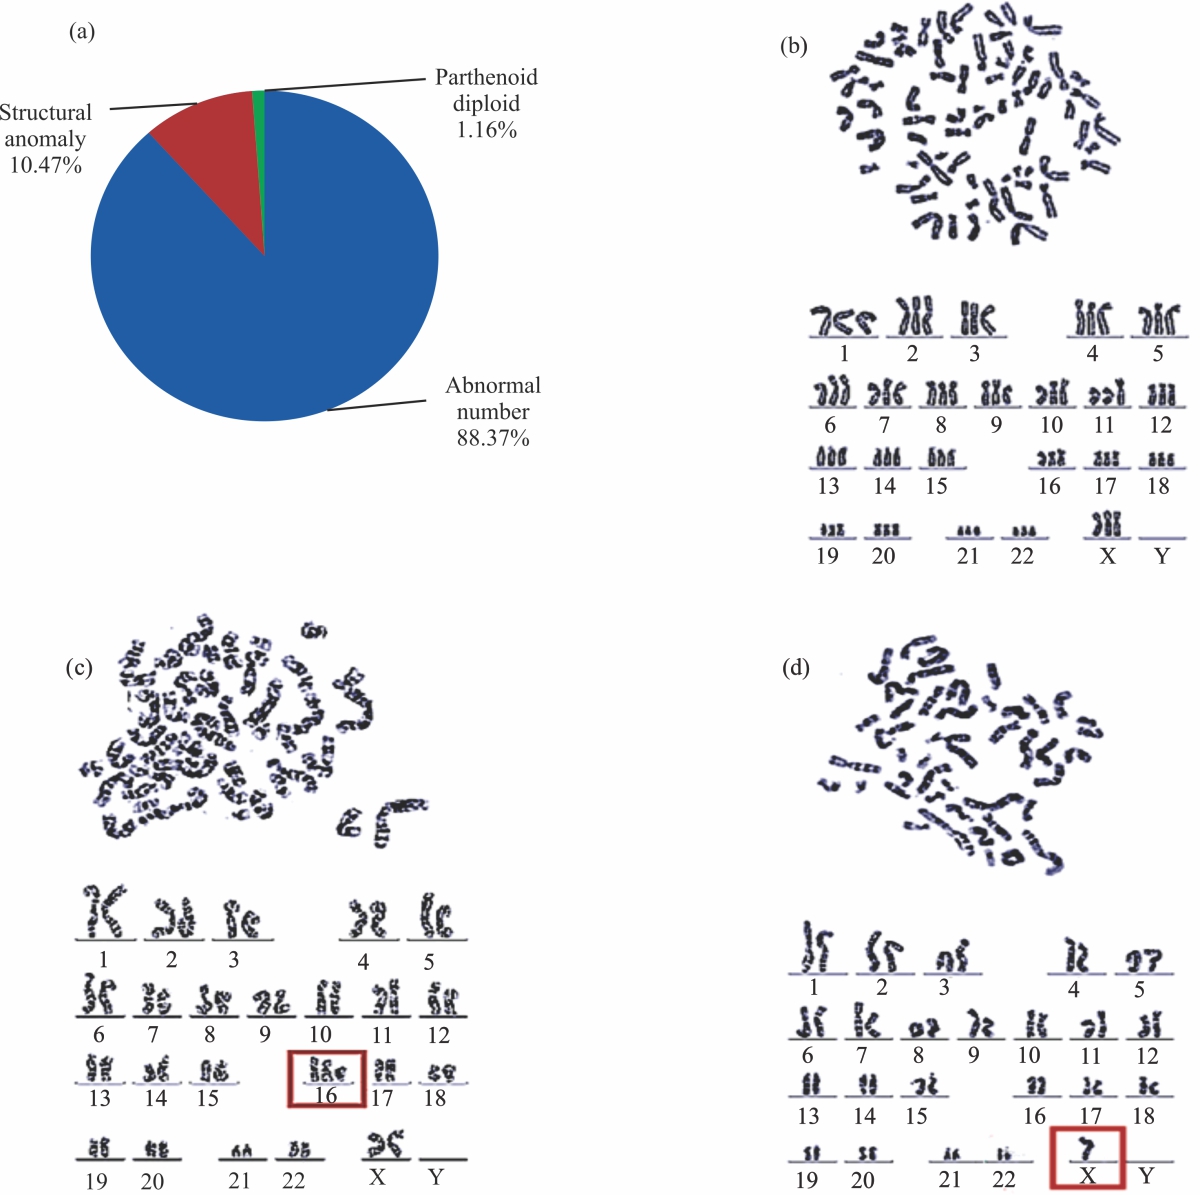 Image for - Application of High-Throughput Ligation-Dependent Probe Amplification (HLPA) Detection in Karyotype Analysis of Spontaneous Abortion Pregnancy Tissues